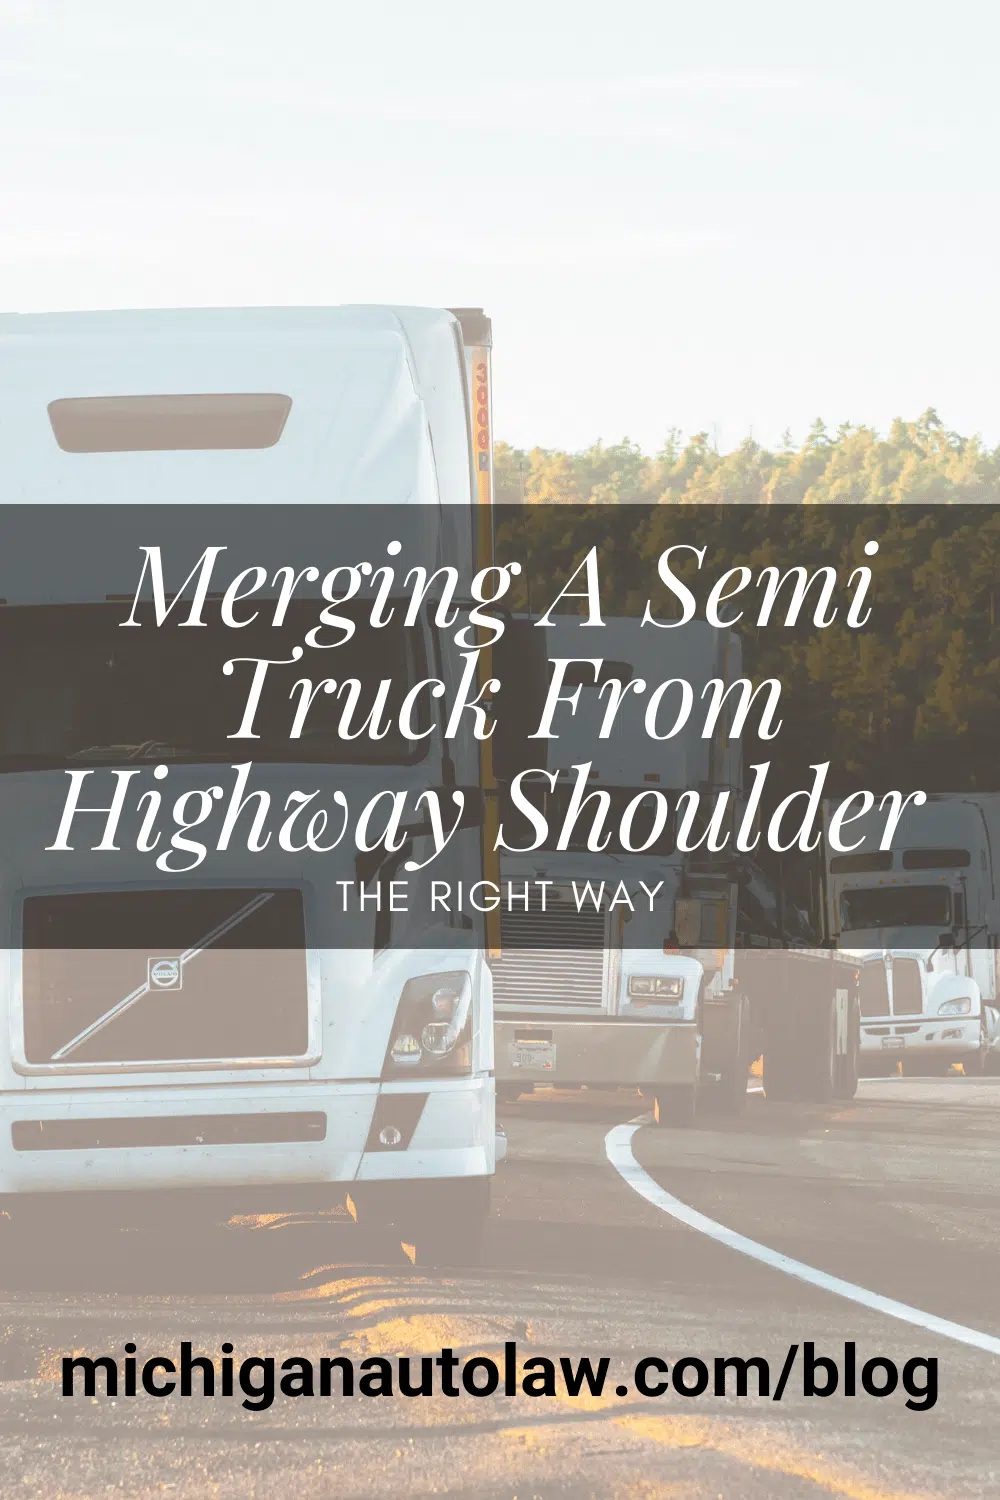 Merging A Semi Truck From Highway Shoulder The Right Way